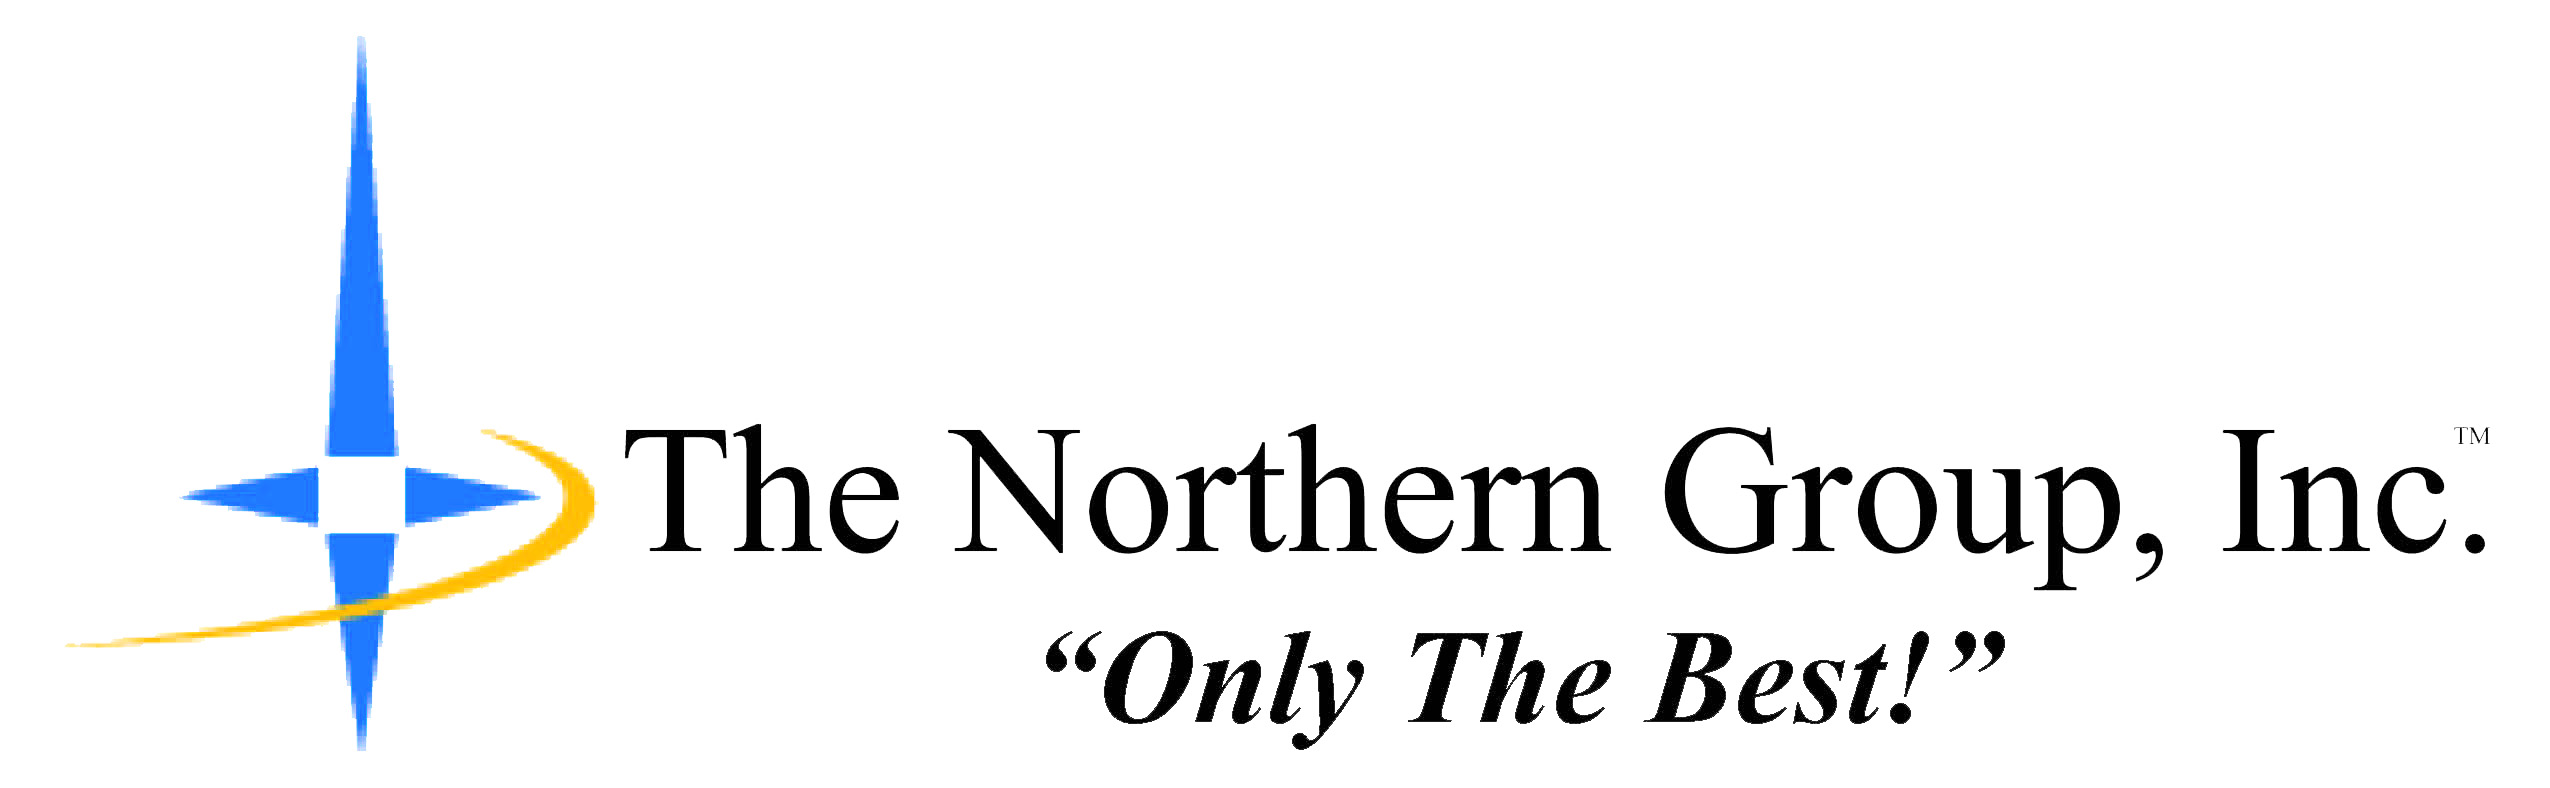 The Northern Group, Inc.